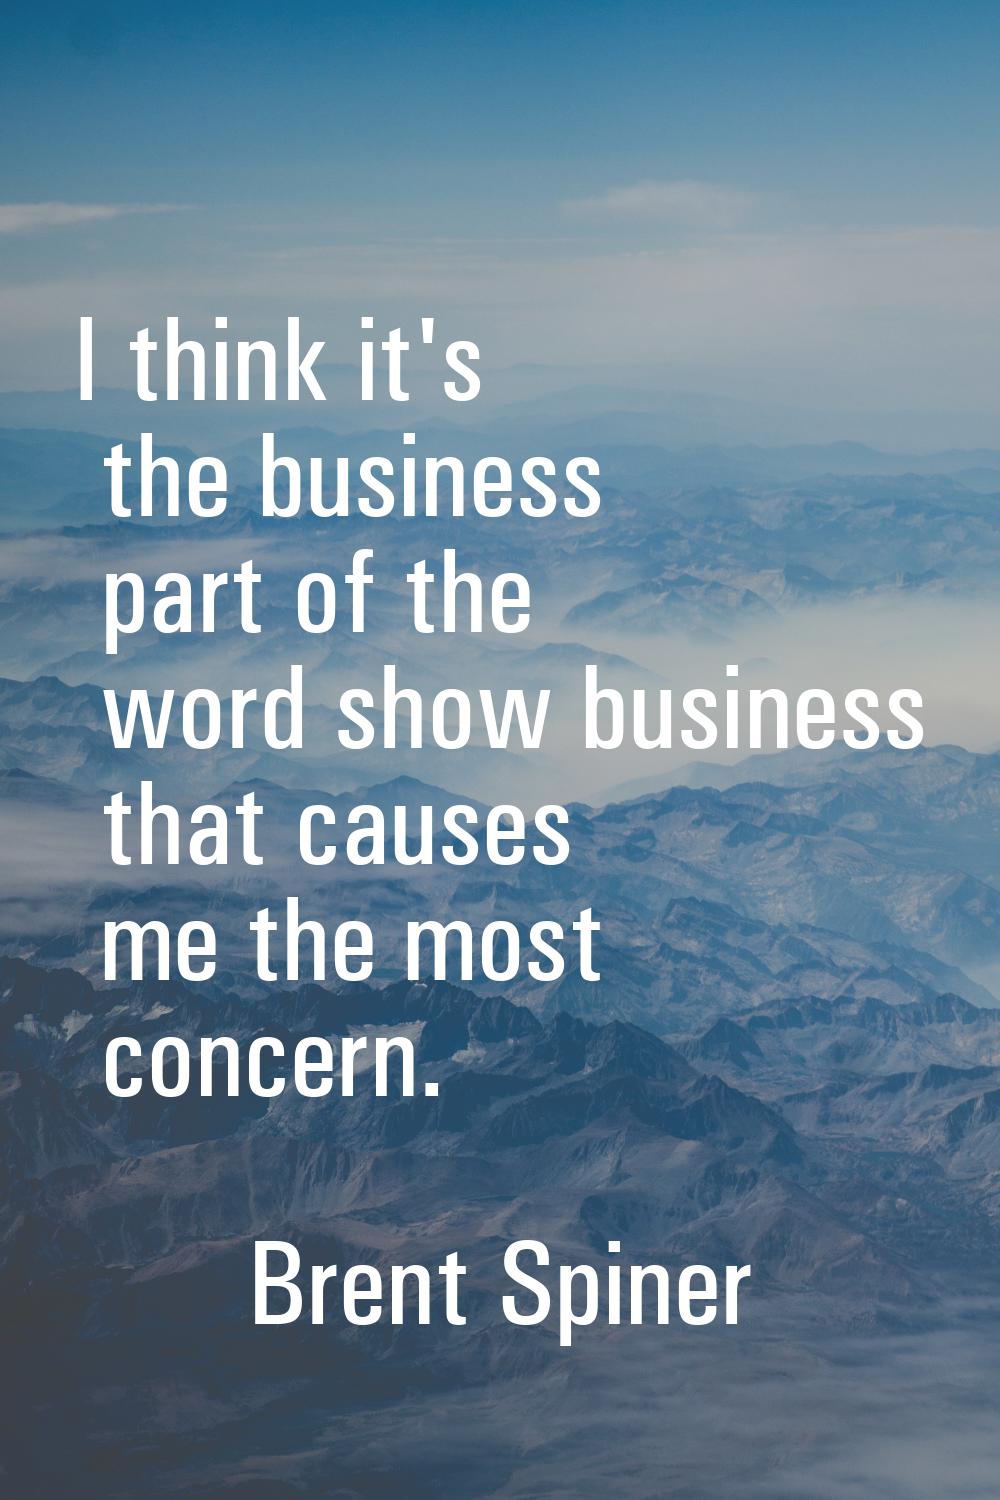 I think it's the business part of the word show business that causes me the most concern.